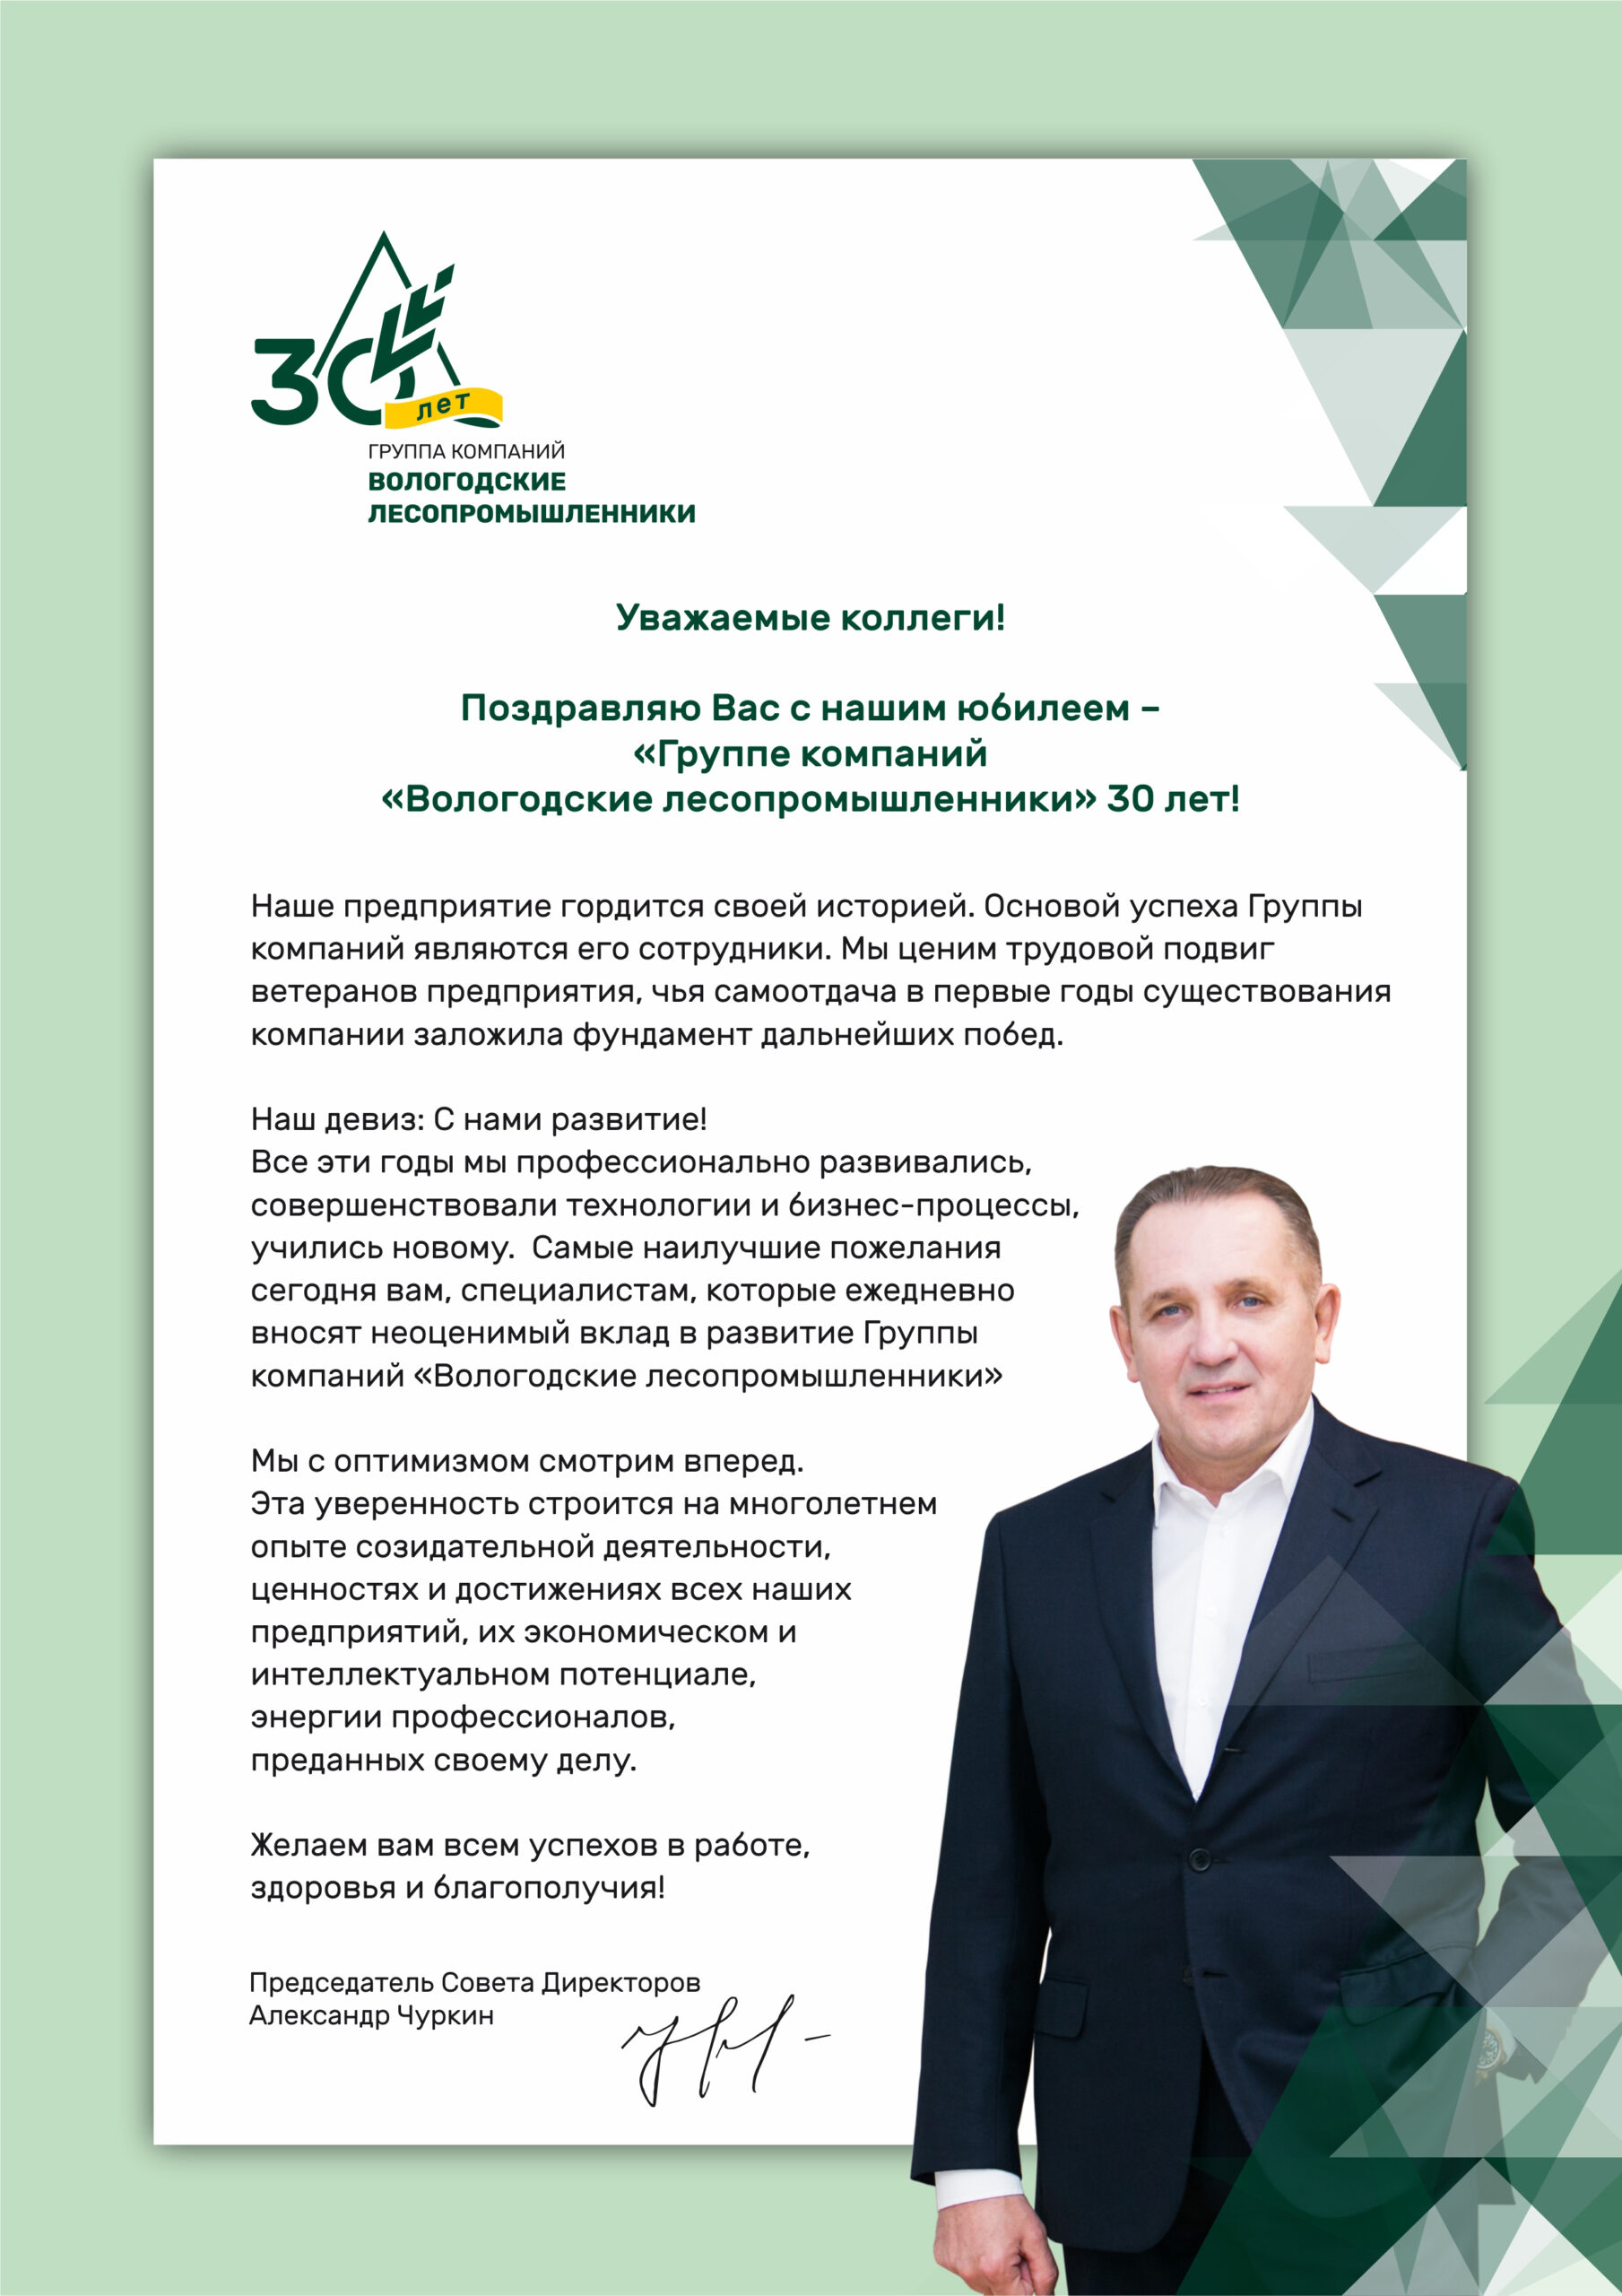 Congratulations to Alexander Churkin, Chairman of the Board of Directors of Vologda Group of Companies Joint Stock Company